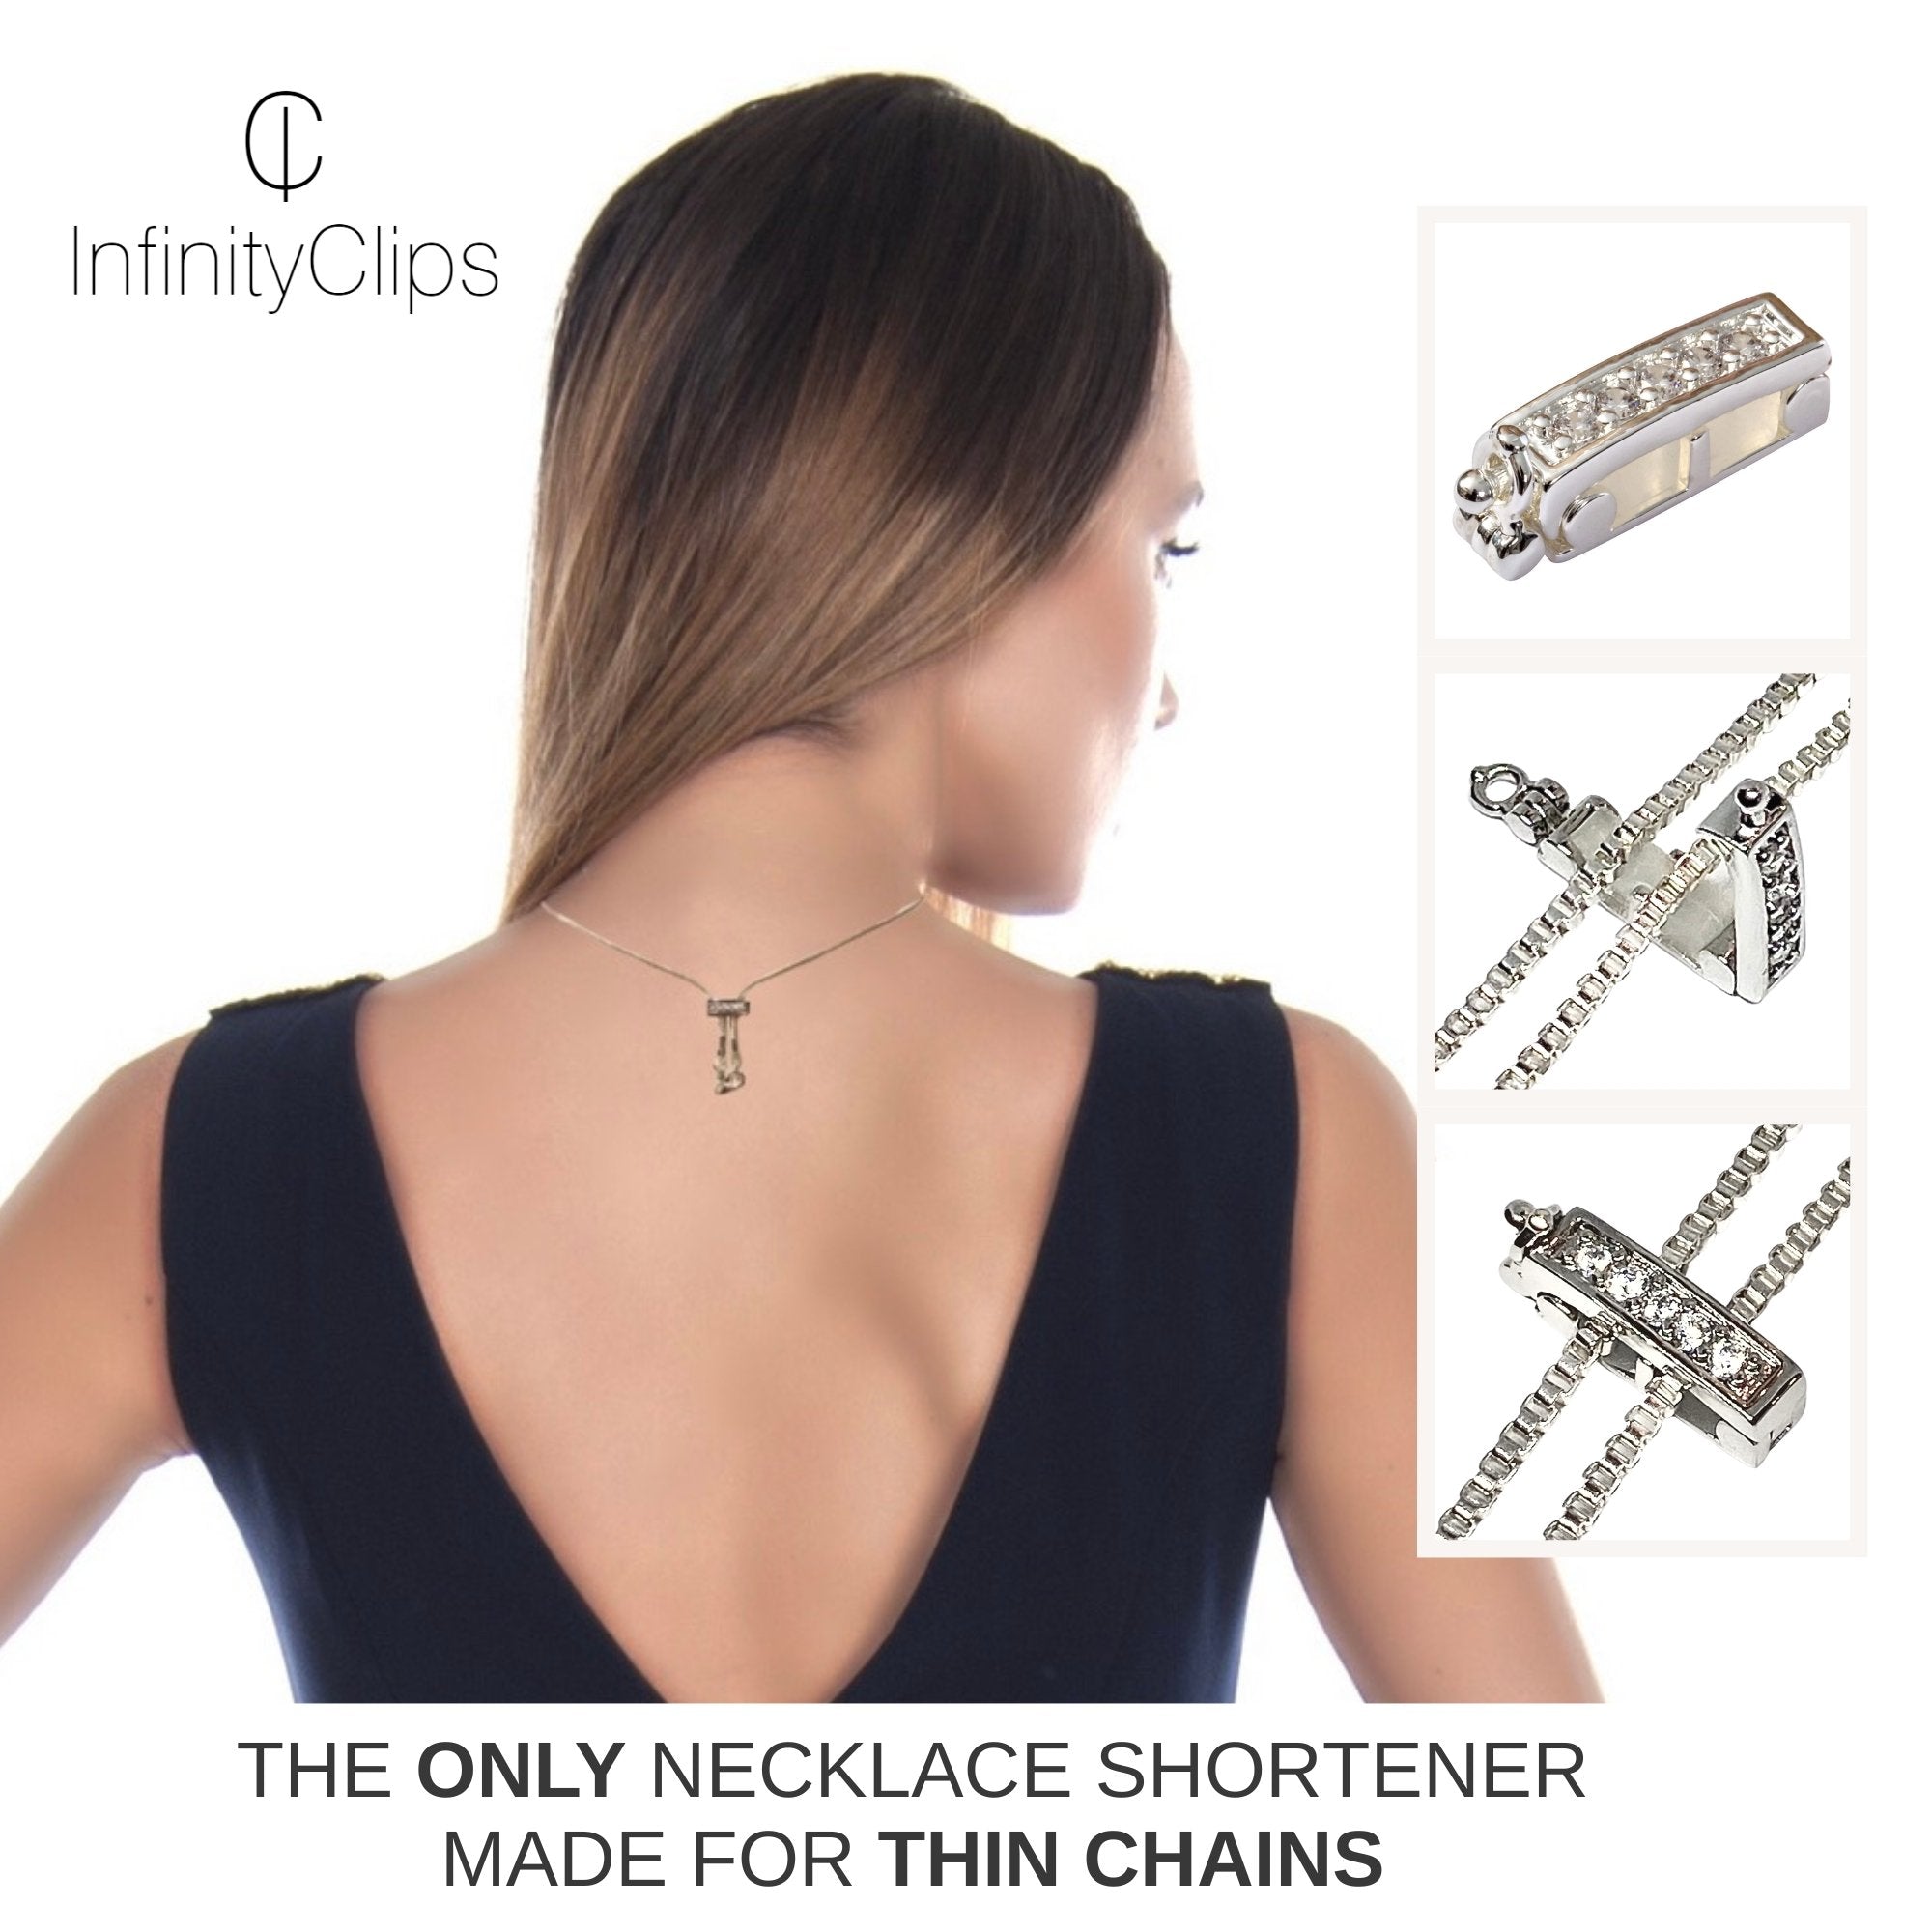 Infinity Clips 3 Piece Large Set Necklace Chain Shorteners W